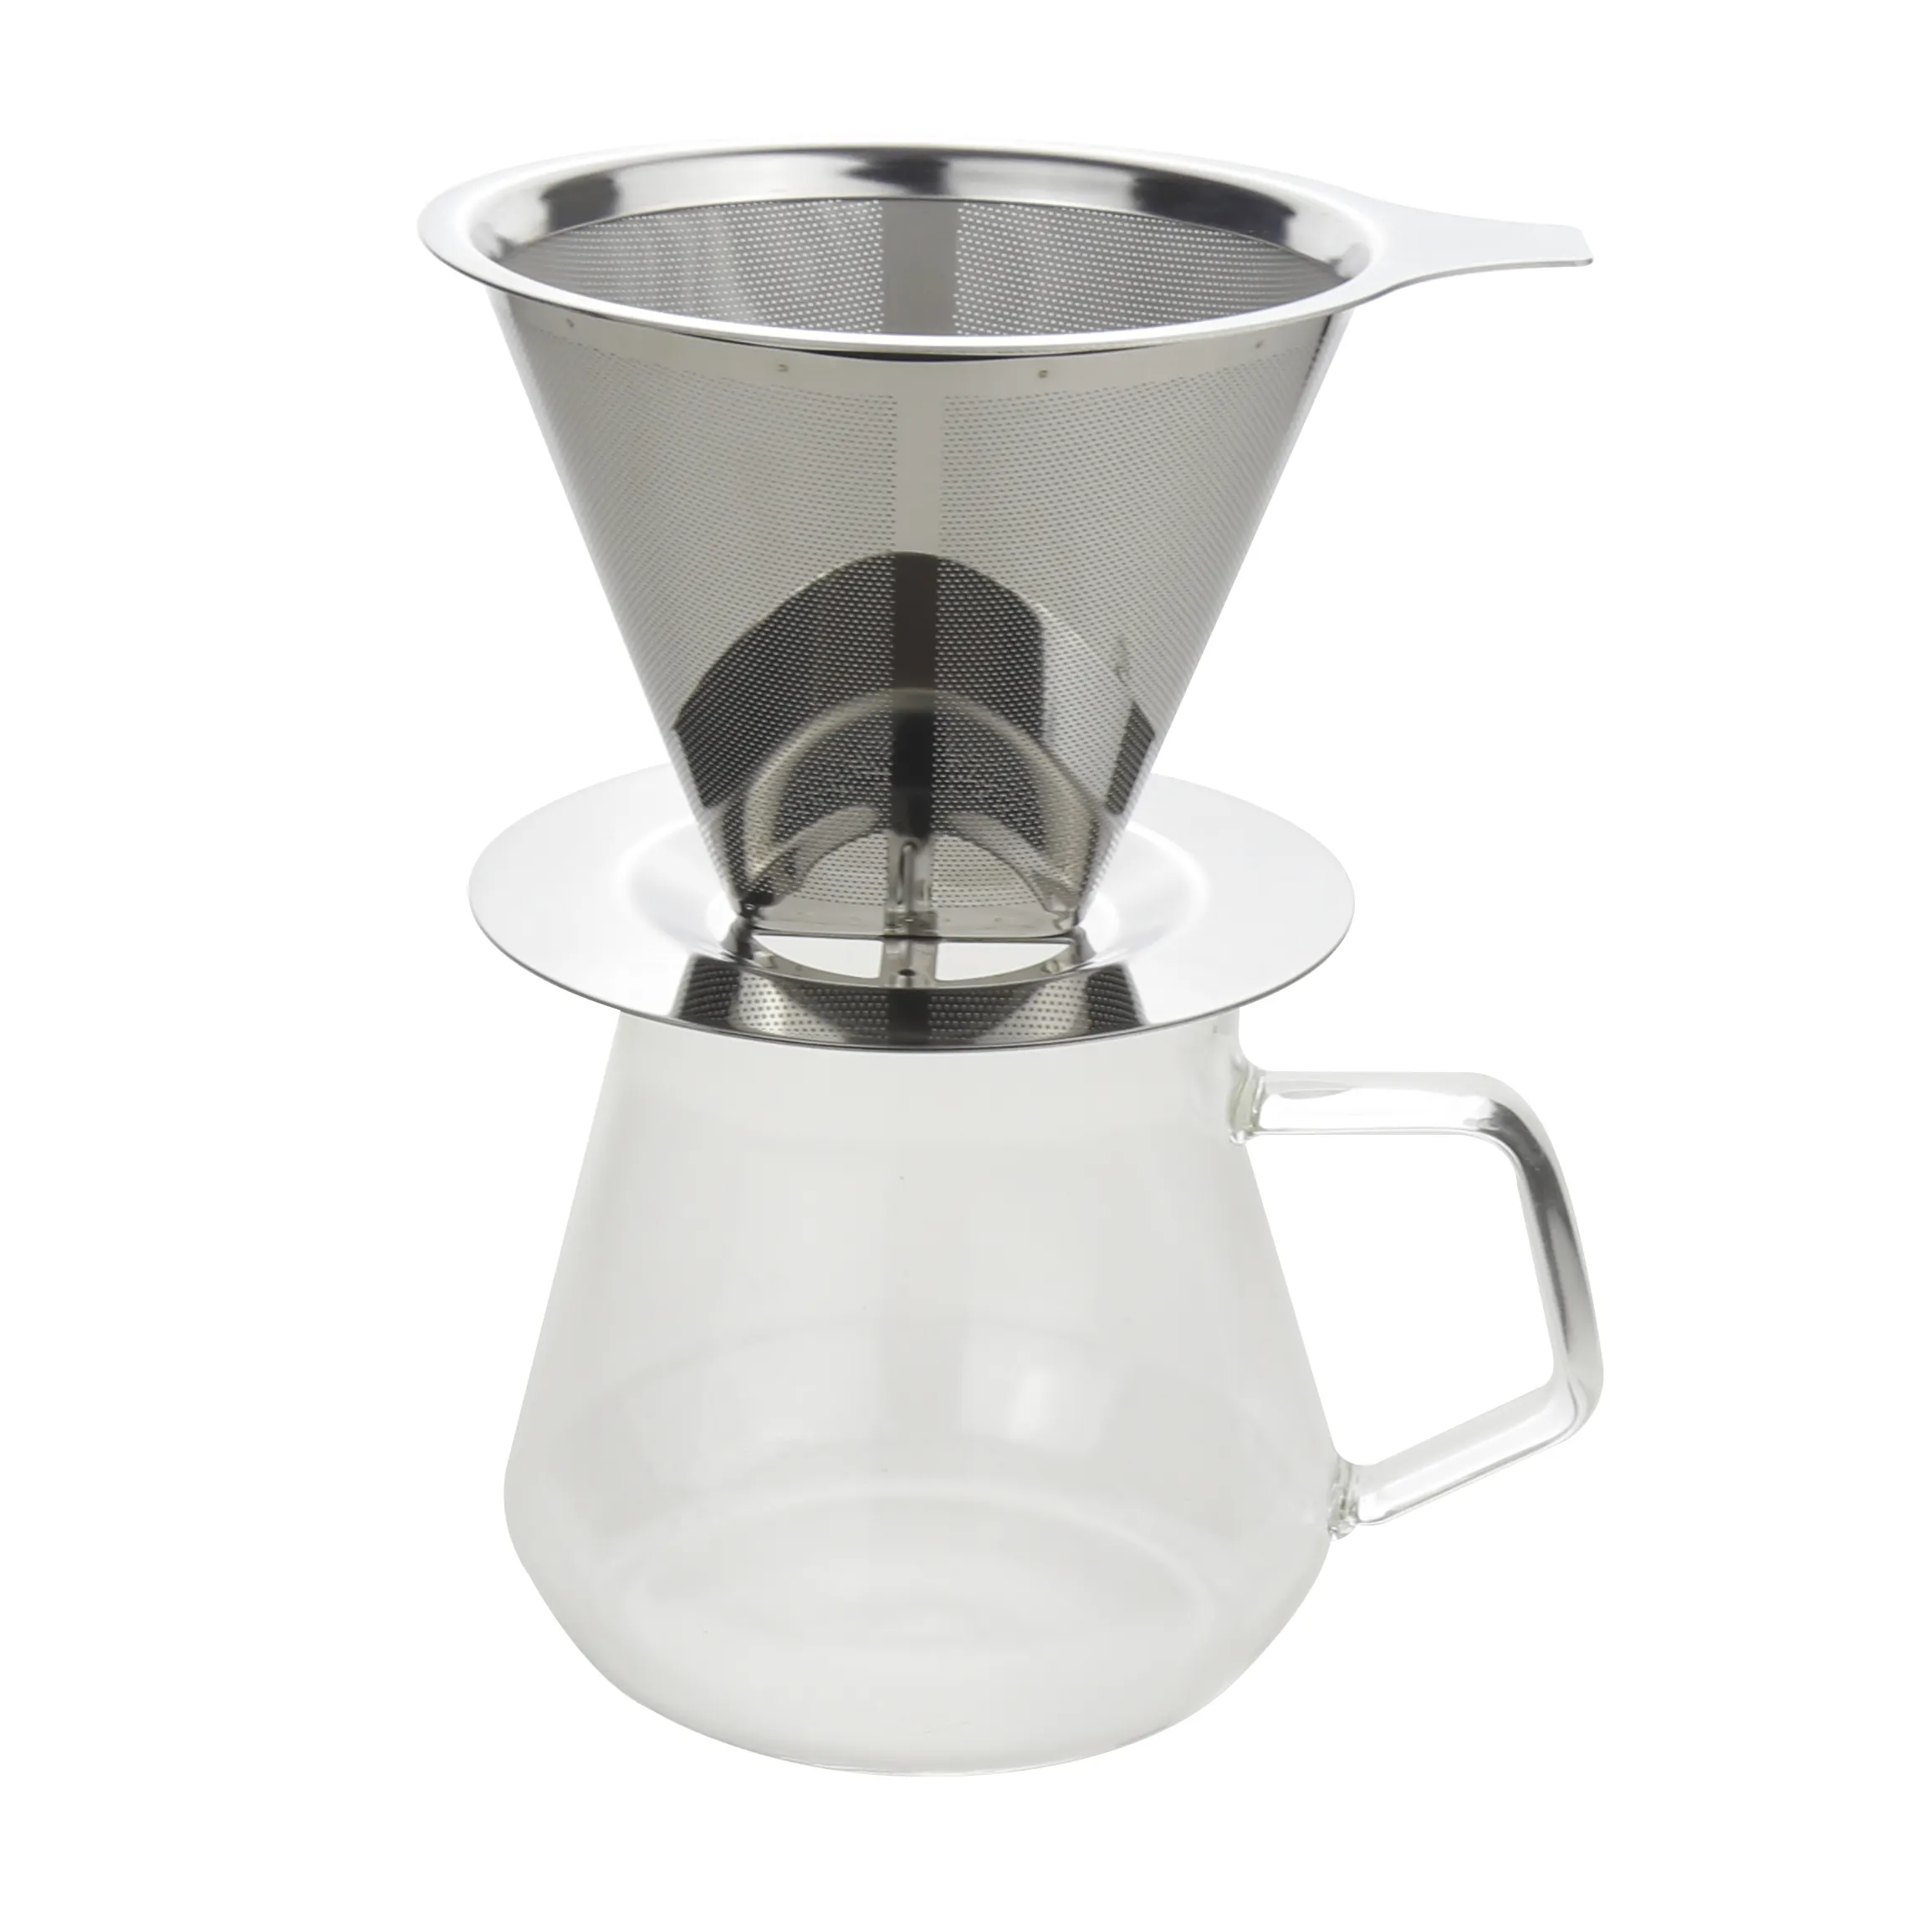 Reusable portable pour over cone stainless steel drip coffee filter mesh Mesh Cone Coffee Dripper stand holder